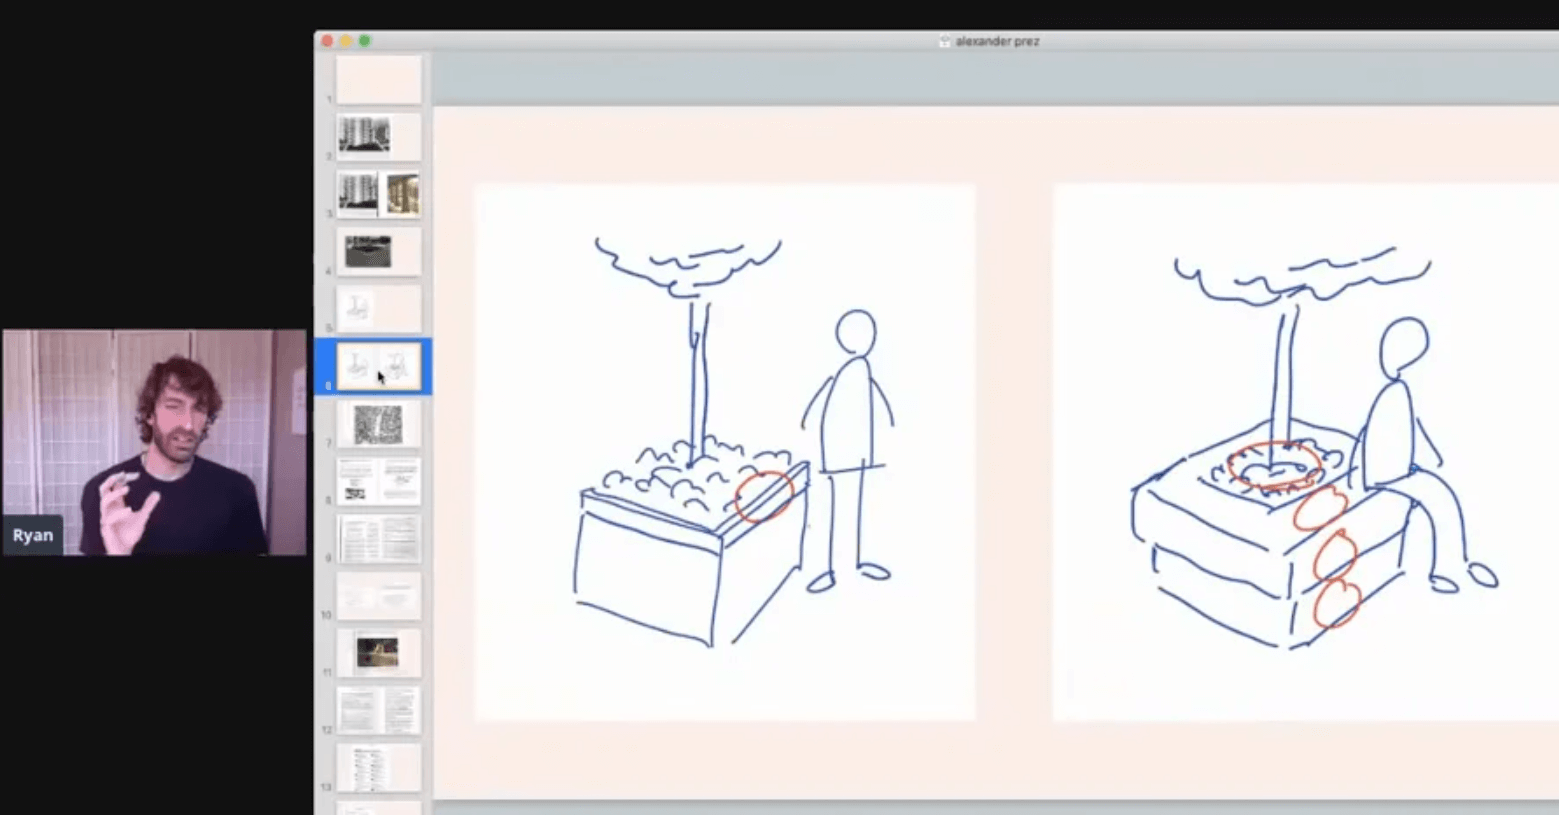 Let's Learn How to Draw! on Vimeo